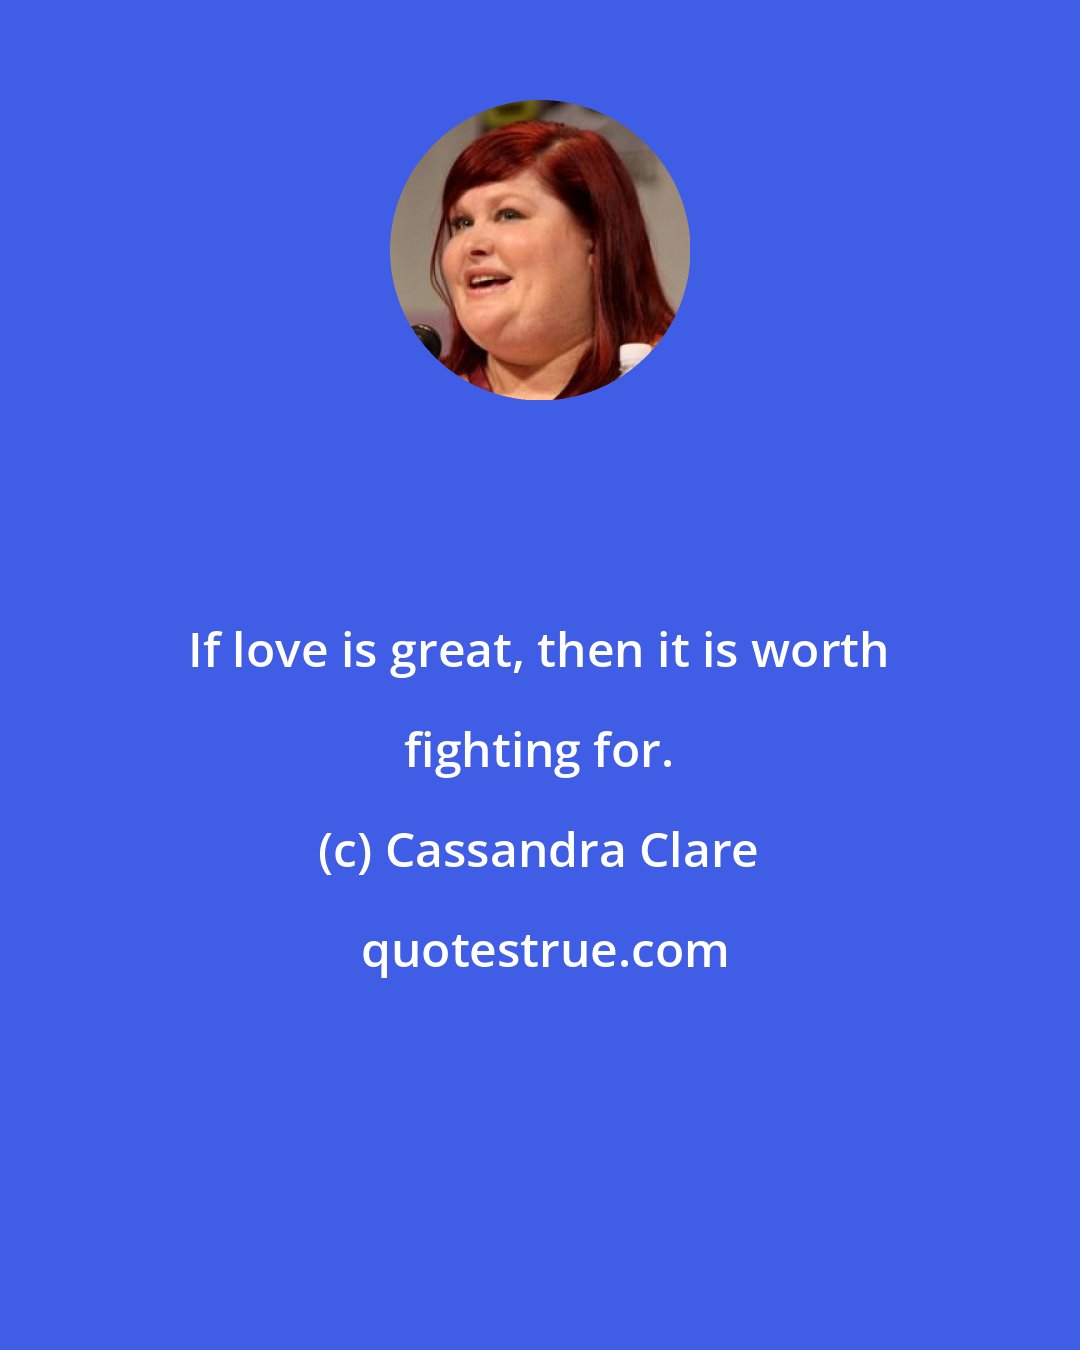 Cassandra Clare: If love is great, then it is worth fighting for.